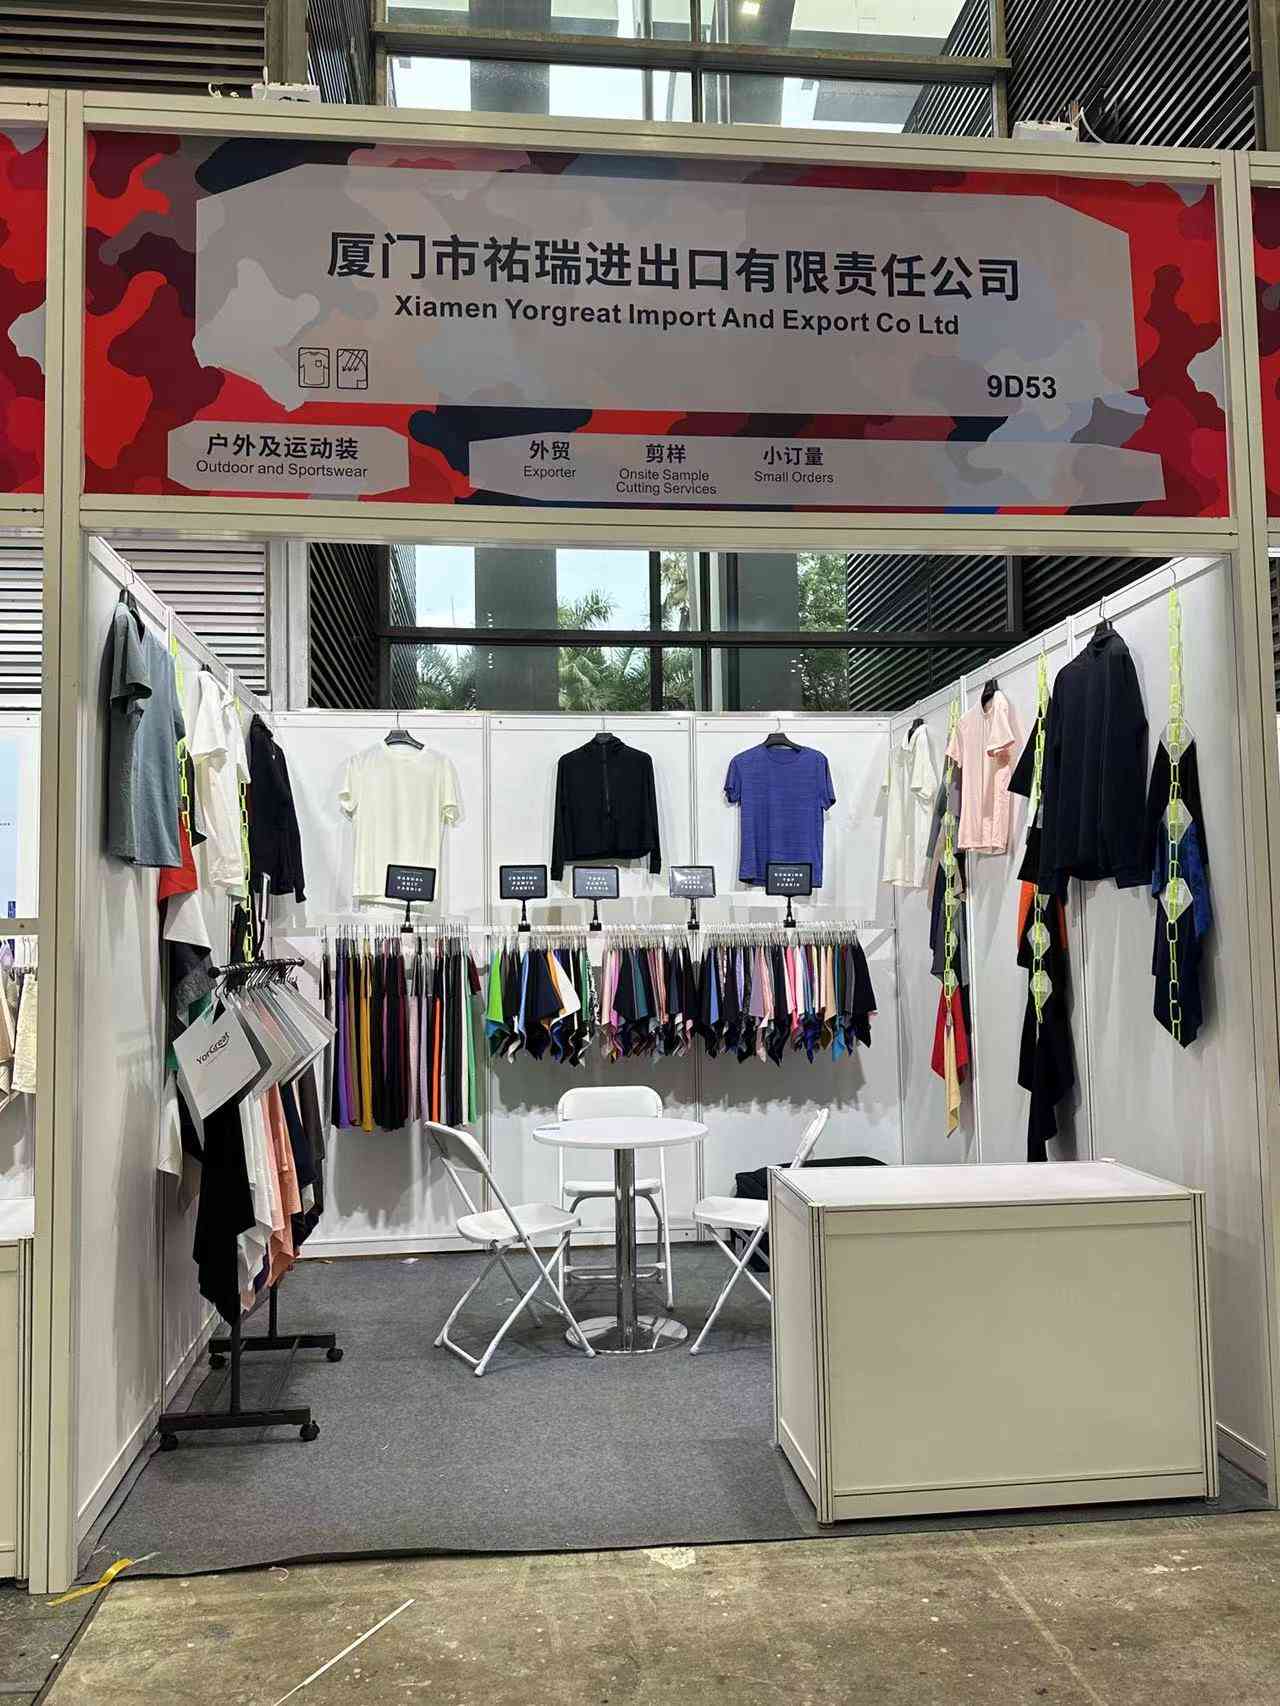 Welcome To Visit Our Booth During The Intertextile Shenzhen Apparel Fabrics Exhibition In Shenzhen